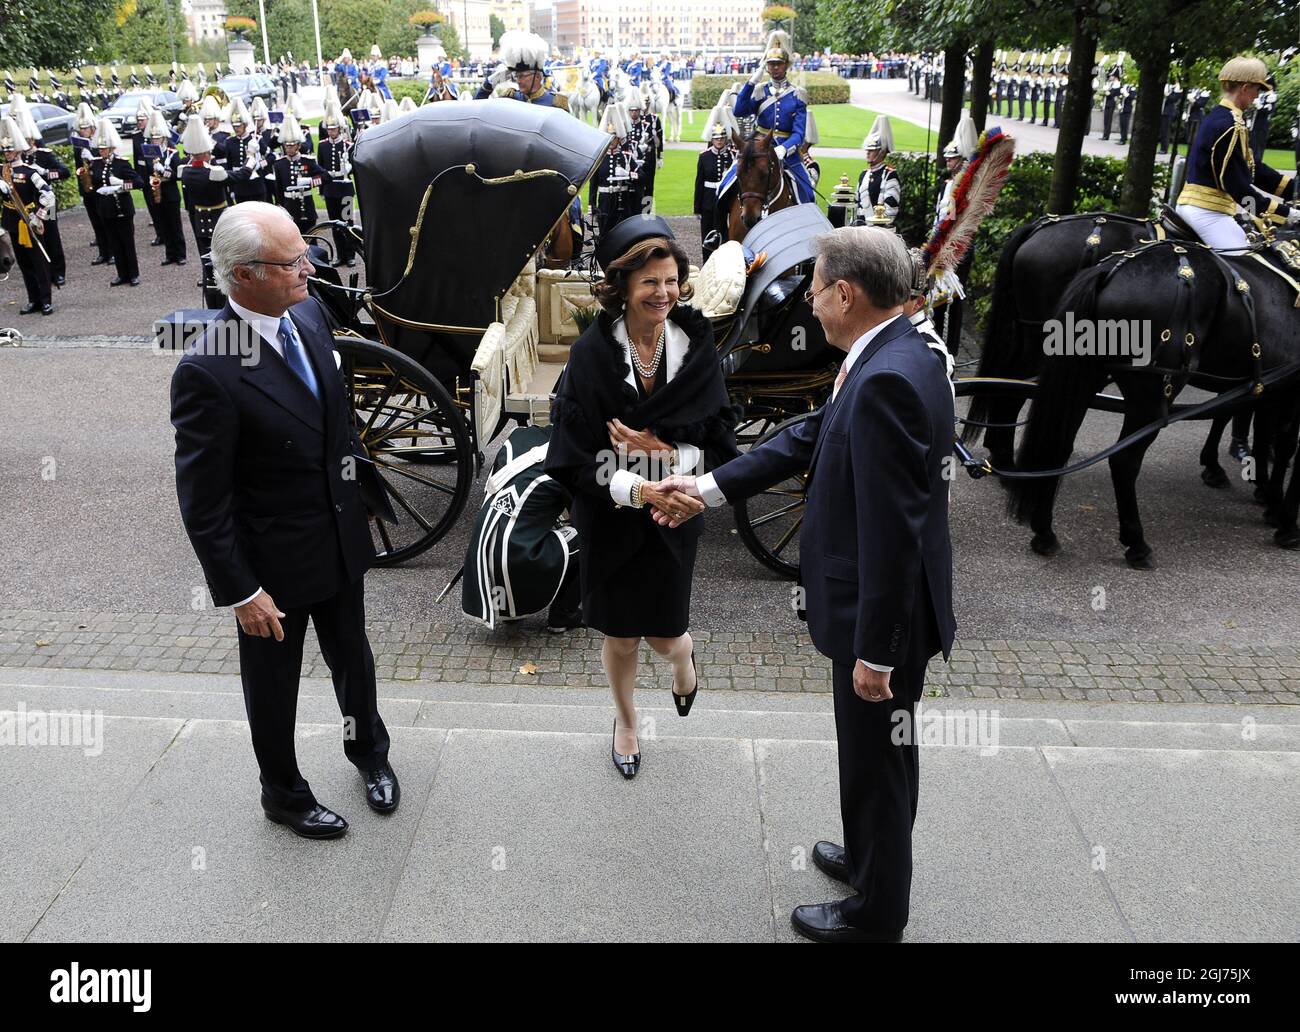 King Carl Gustaf and Queen Silvia are being welcomed by the Speaker of the Parliament, Per Westerberg, to the open9ing of the House of the Parliament in Stockholm., Sweden, September 15, 2011 Stock Photo